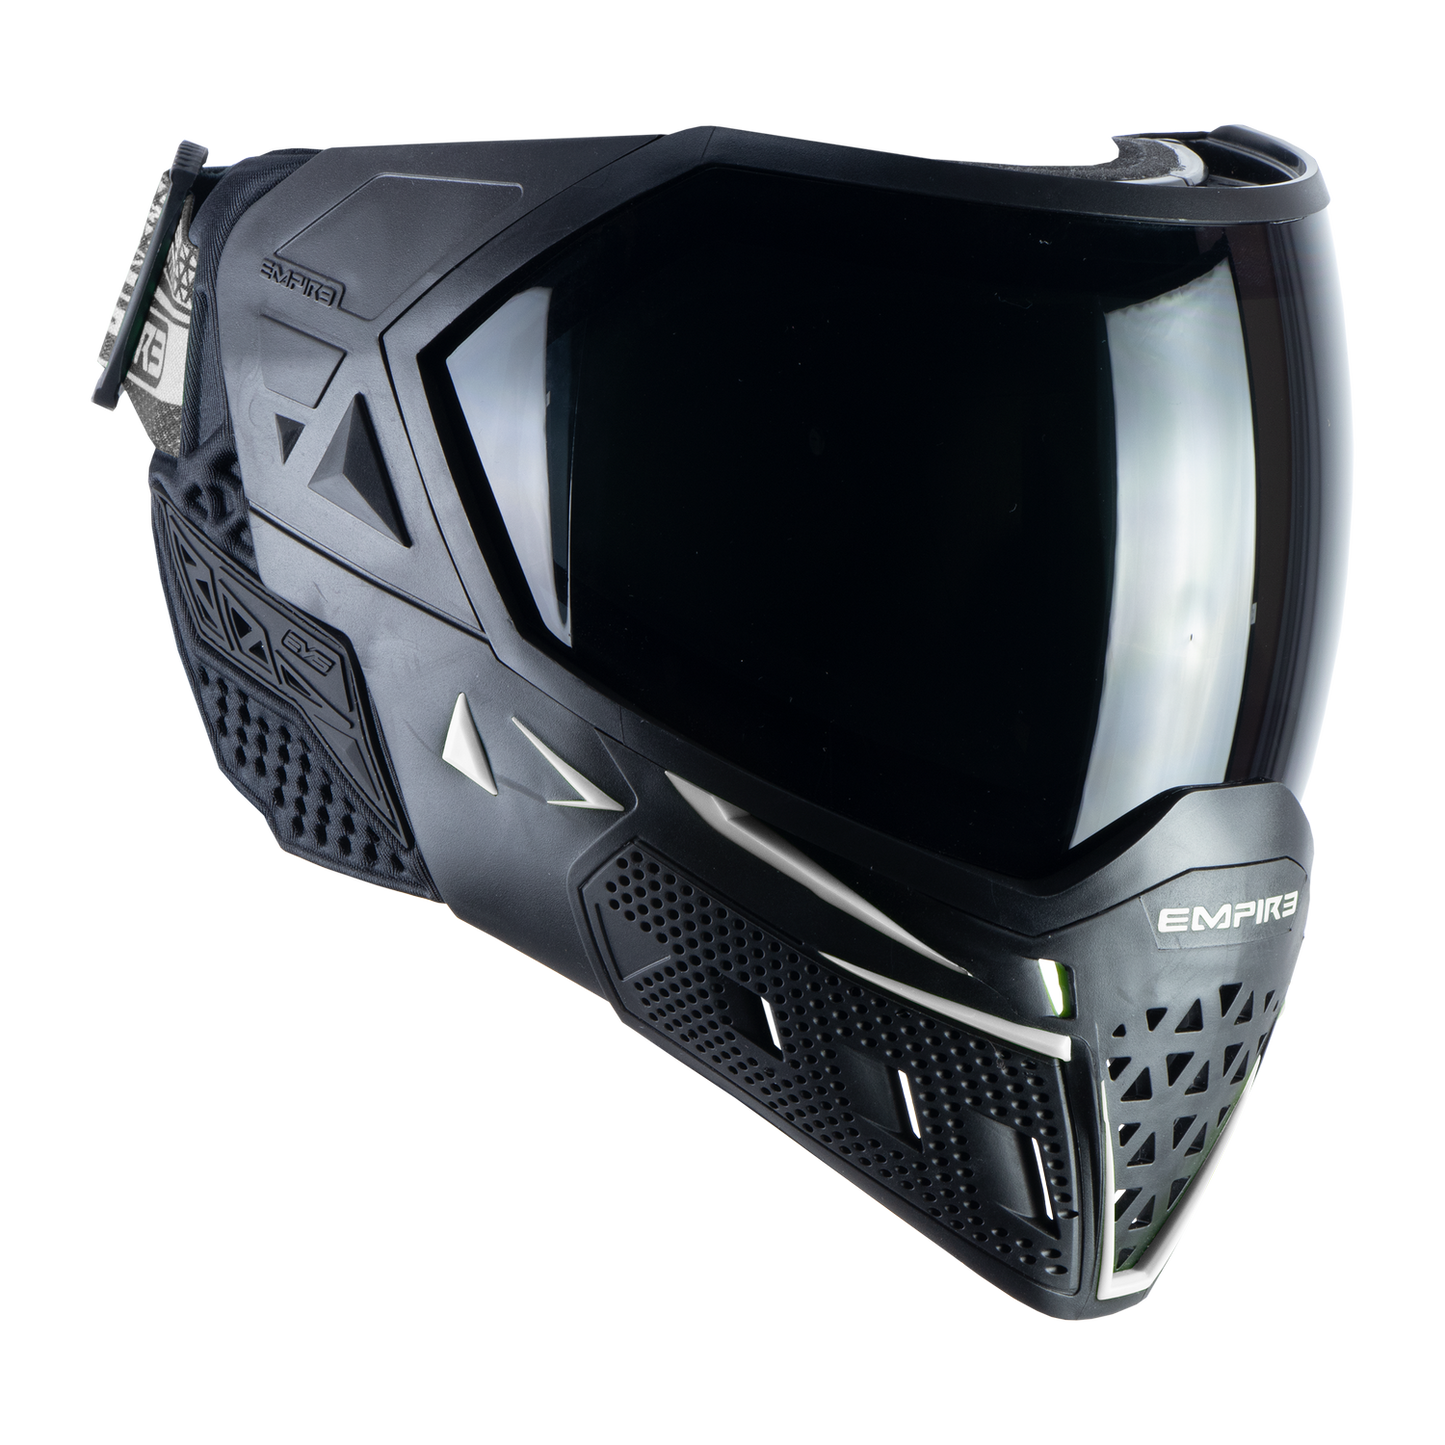 Empire EVS Goggle - Black/White - with 2 lenses [Thermal Ninja & Thermal Clear]